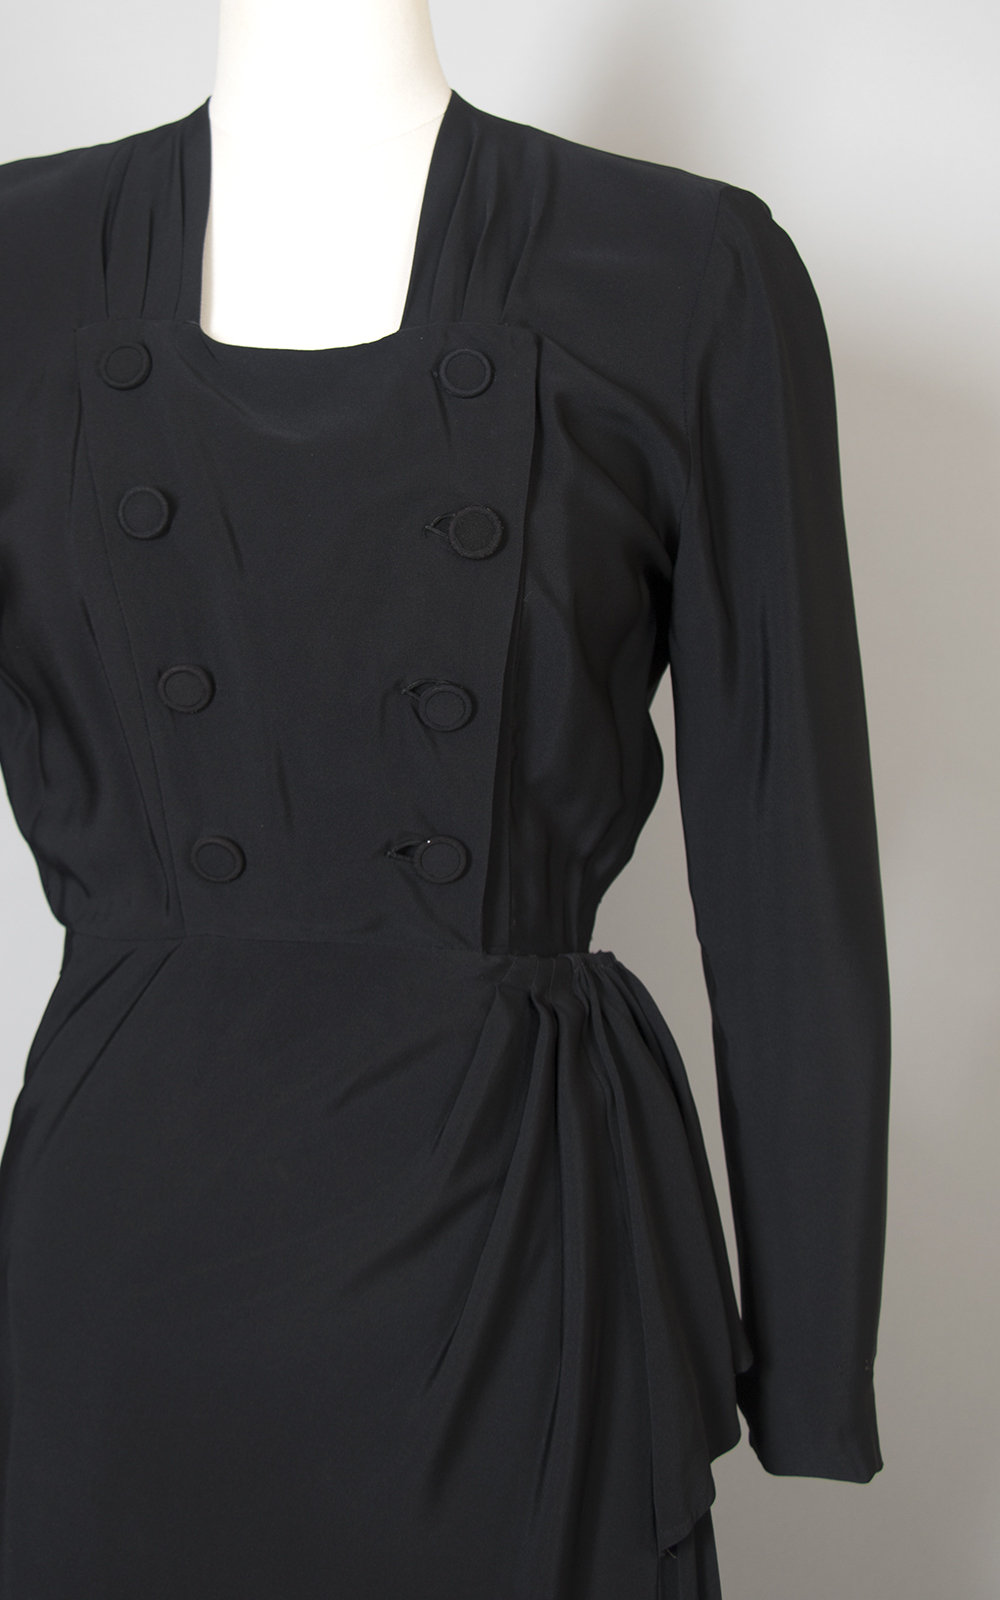 Vintage 1940s Dress | 40s Black Rayon Cocktail Dress Double Breasted Draped Long Sleeve Evening Dress (small)